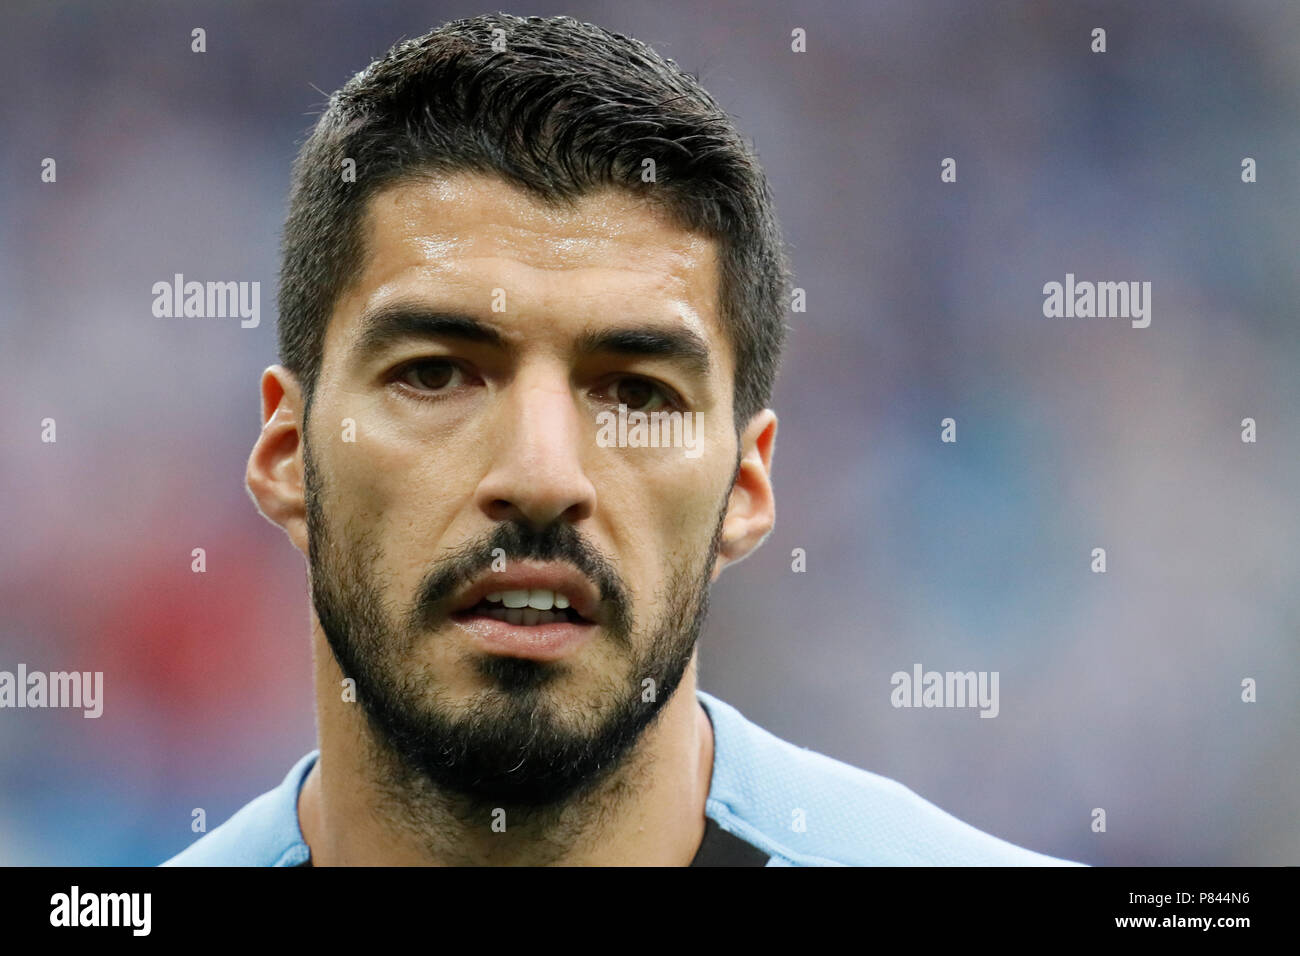 Liverpool prepared to sell Luis Suárez for clubrecord 50mplus  Luis  Suárez  The Guardian